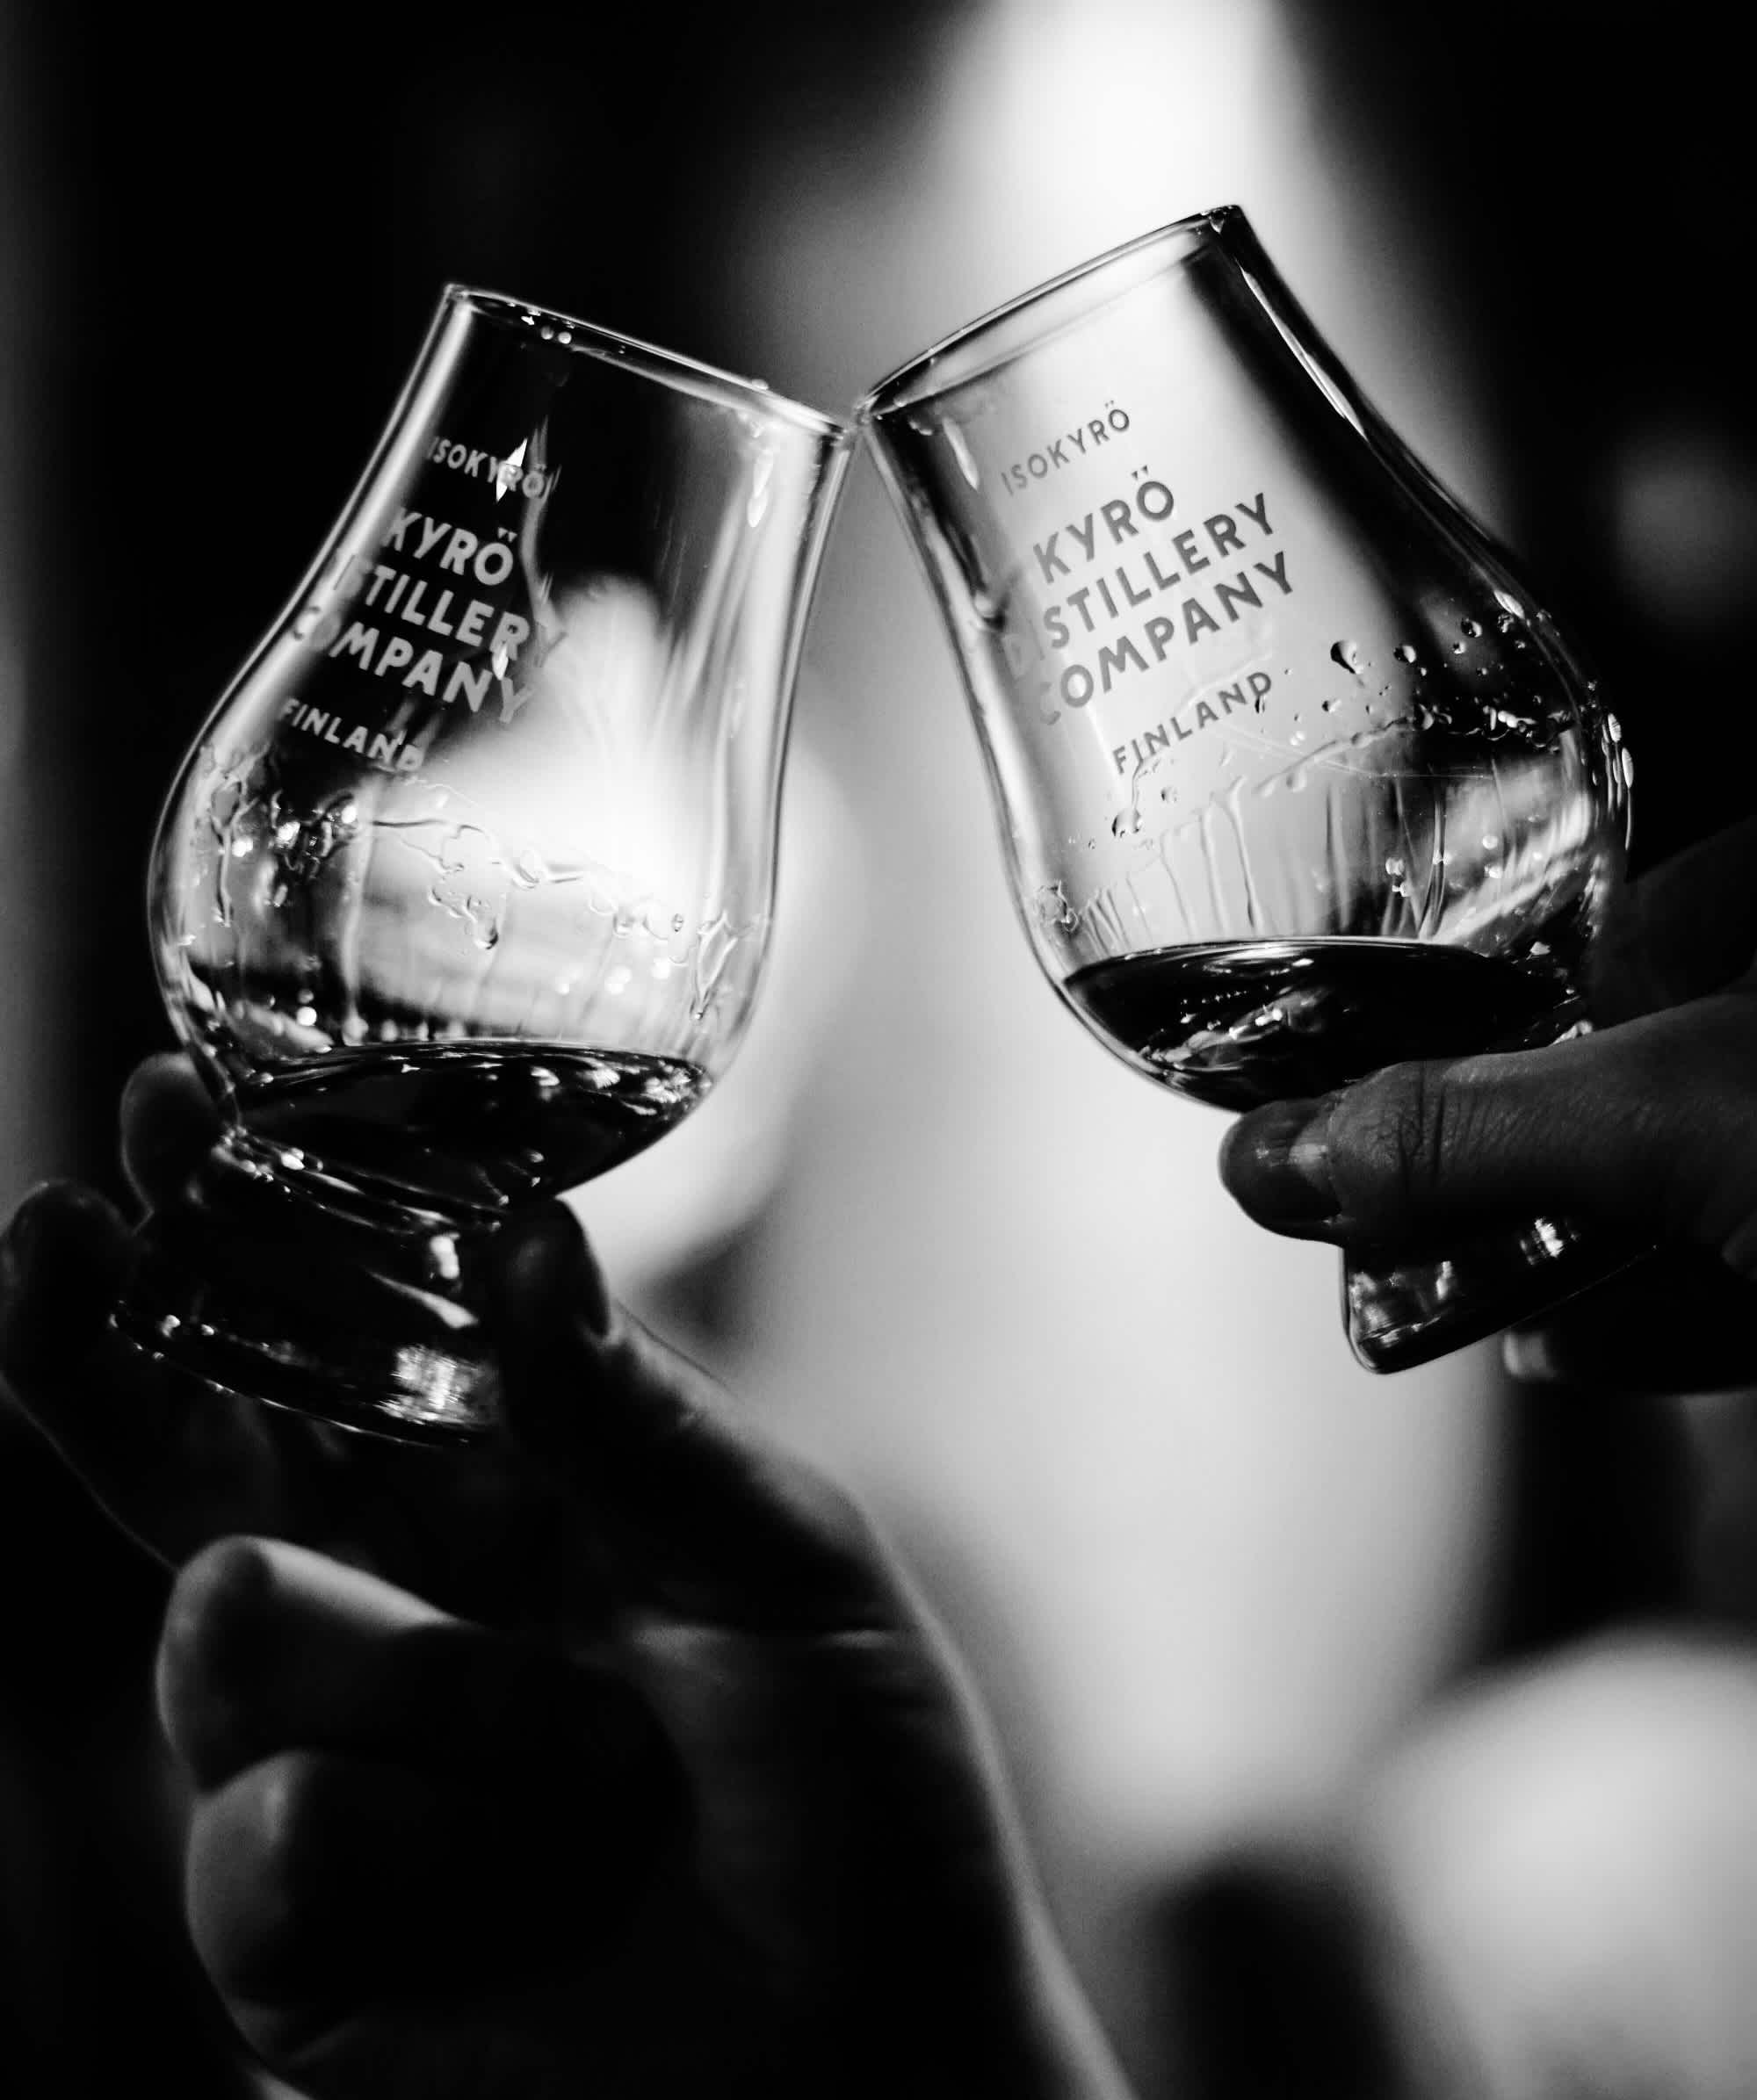 Black and white image of two Kyrö-branded Glencairn tasting glasses filled with whisky cheersing each other. 